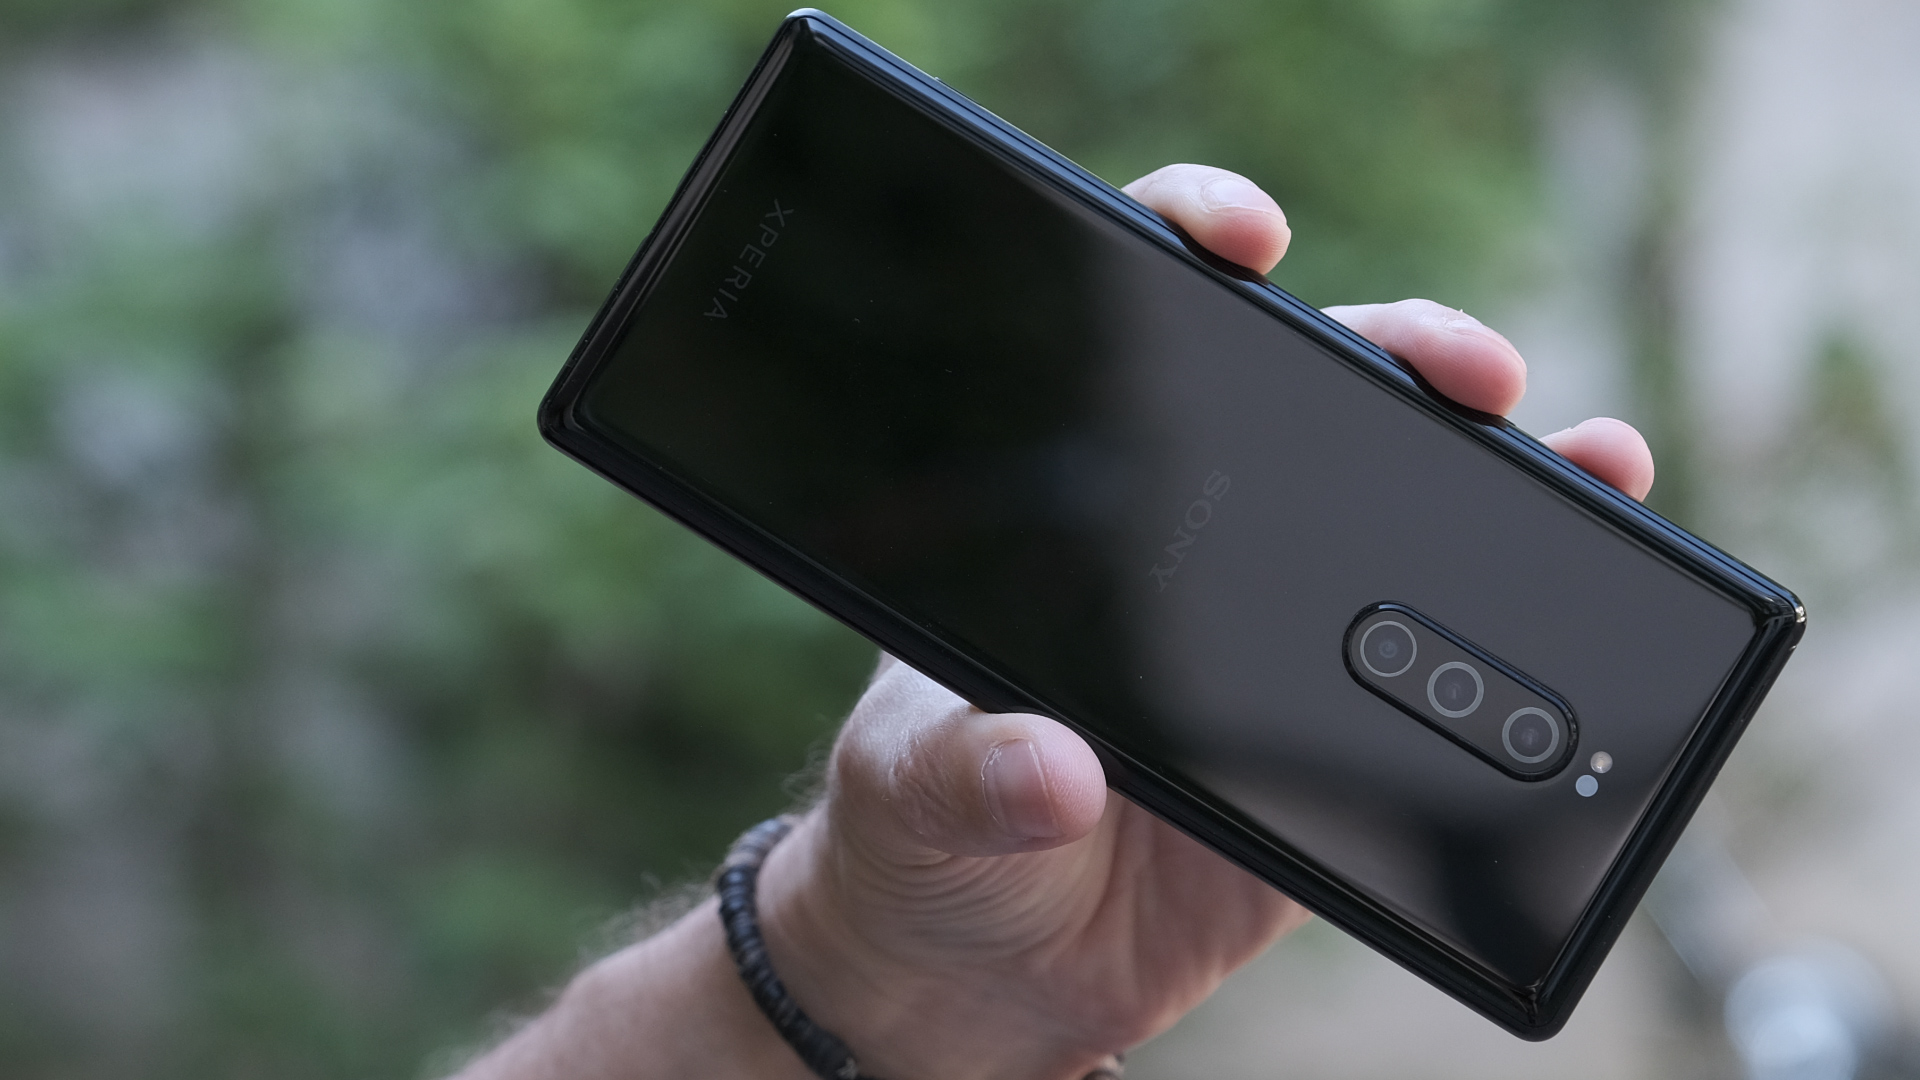 Toestand Zinloos Geschiktheid Sony Xperia 1 Review - Our Test Footage and First Impression | CineD